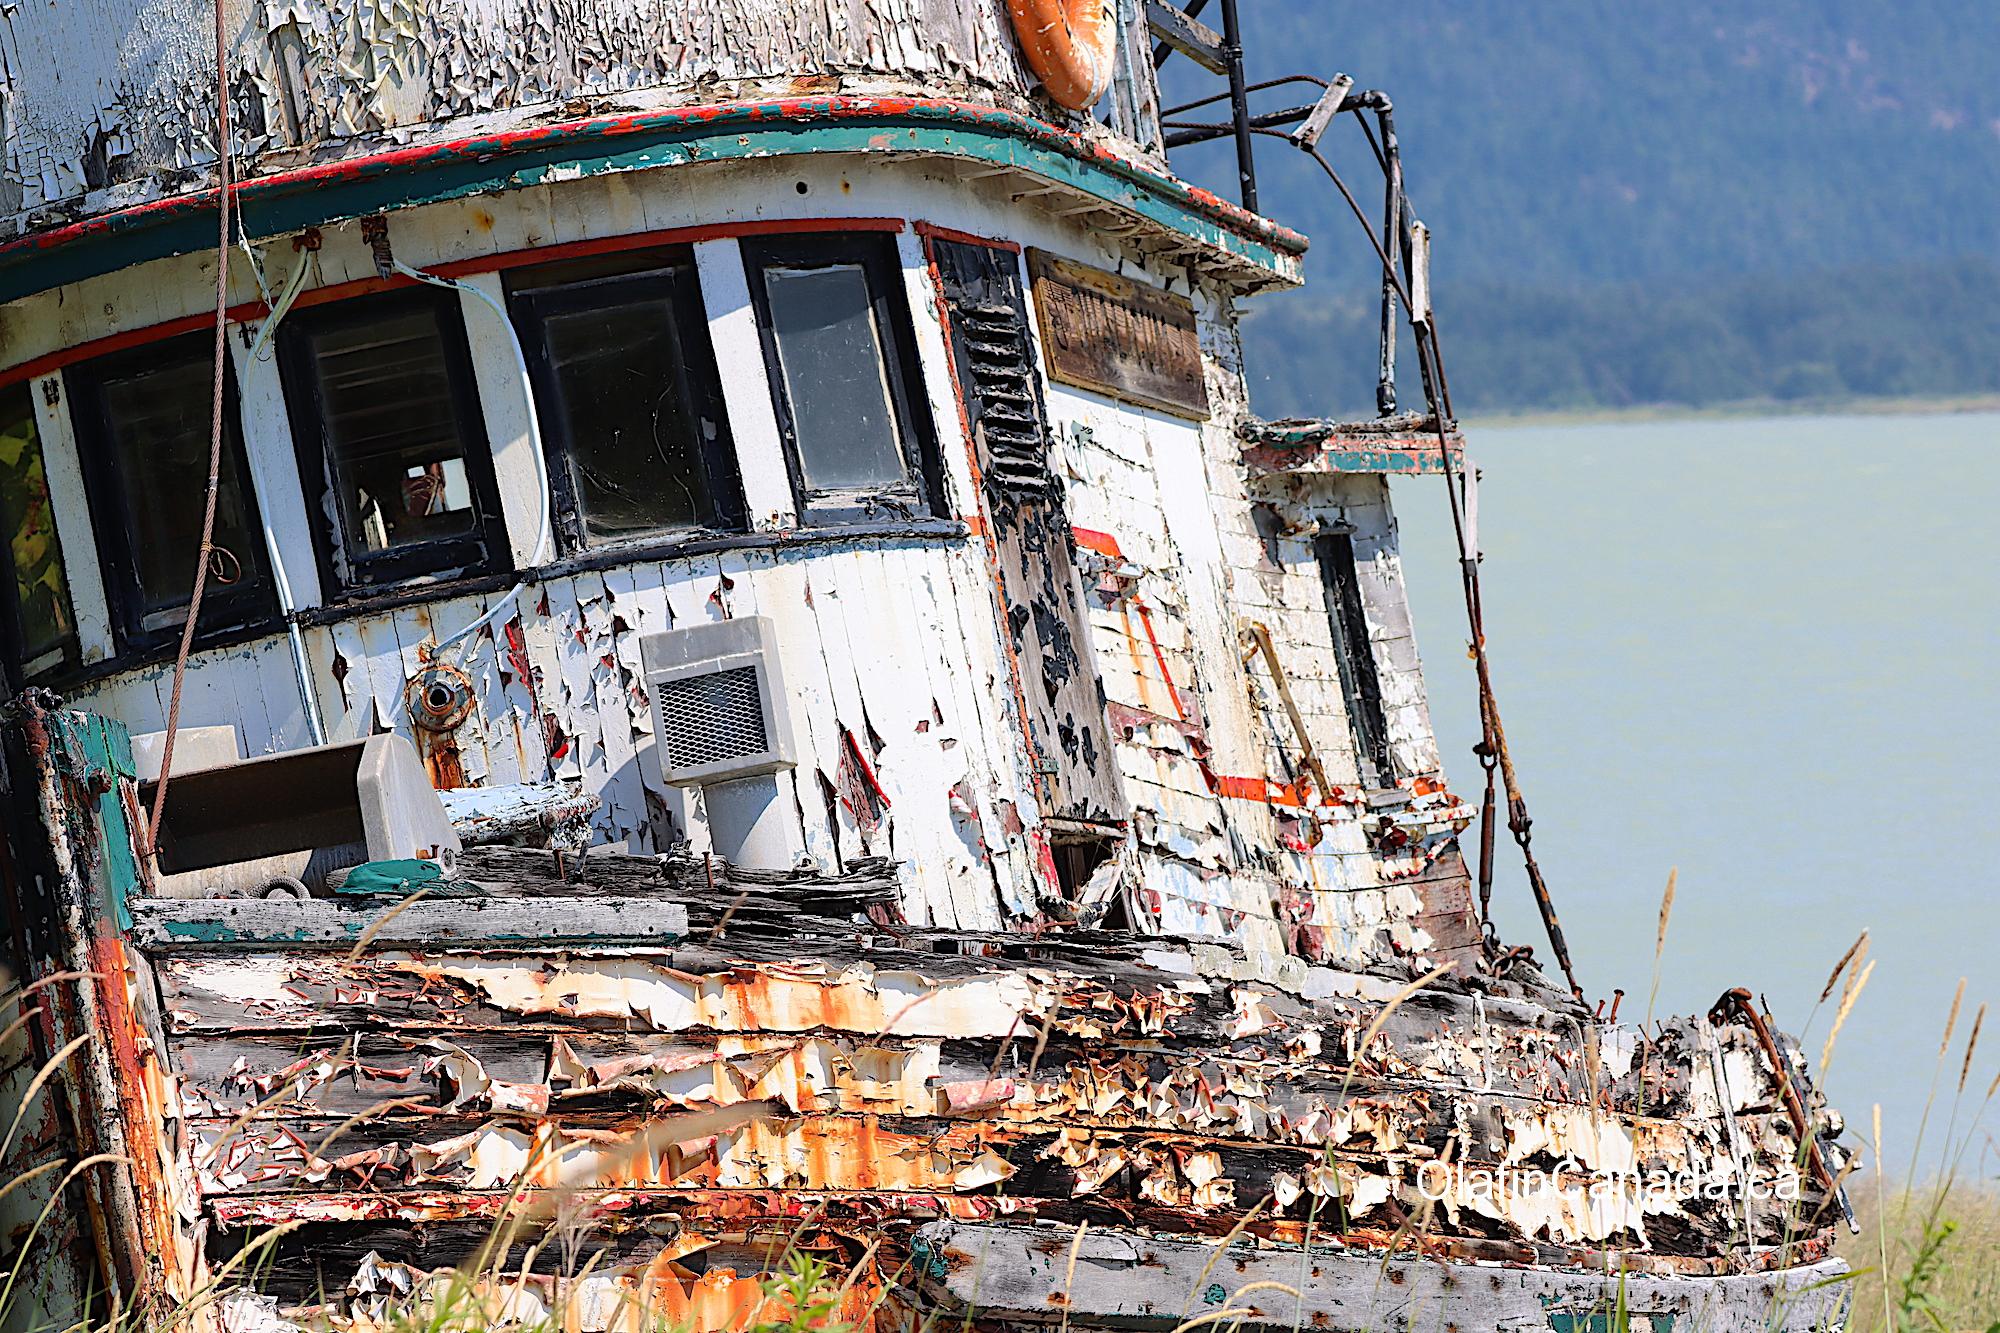 This old boat named Qualichem washed up at the cannery years ago #olafincanada #britishcolumbia #discoverbc #abandonedbc #tallheocannery #bellacoola #boat